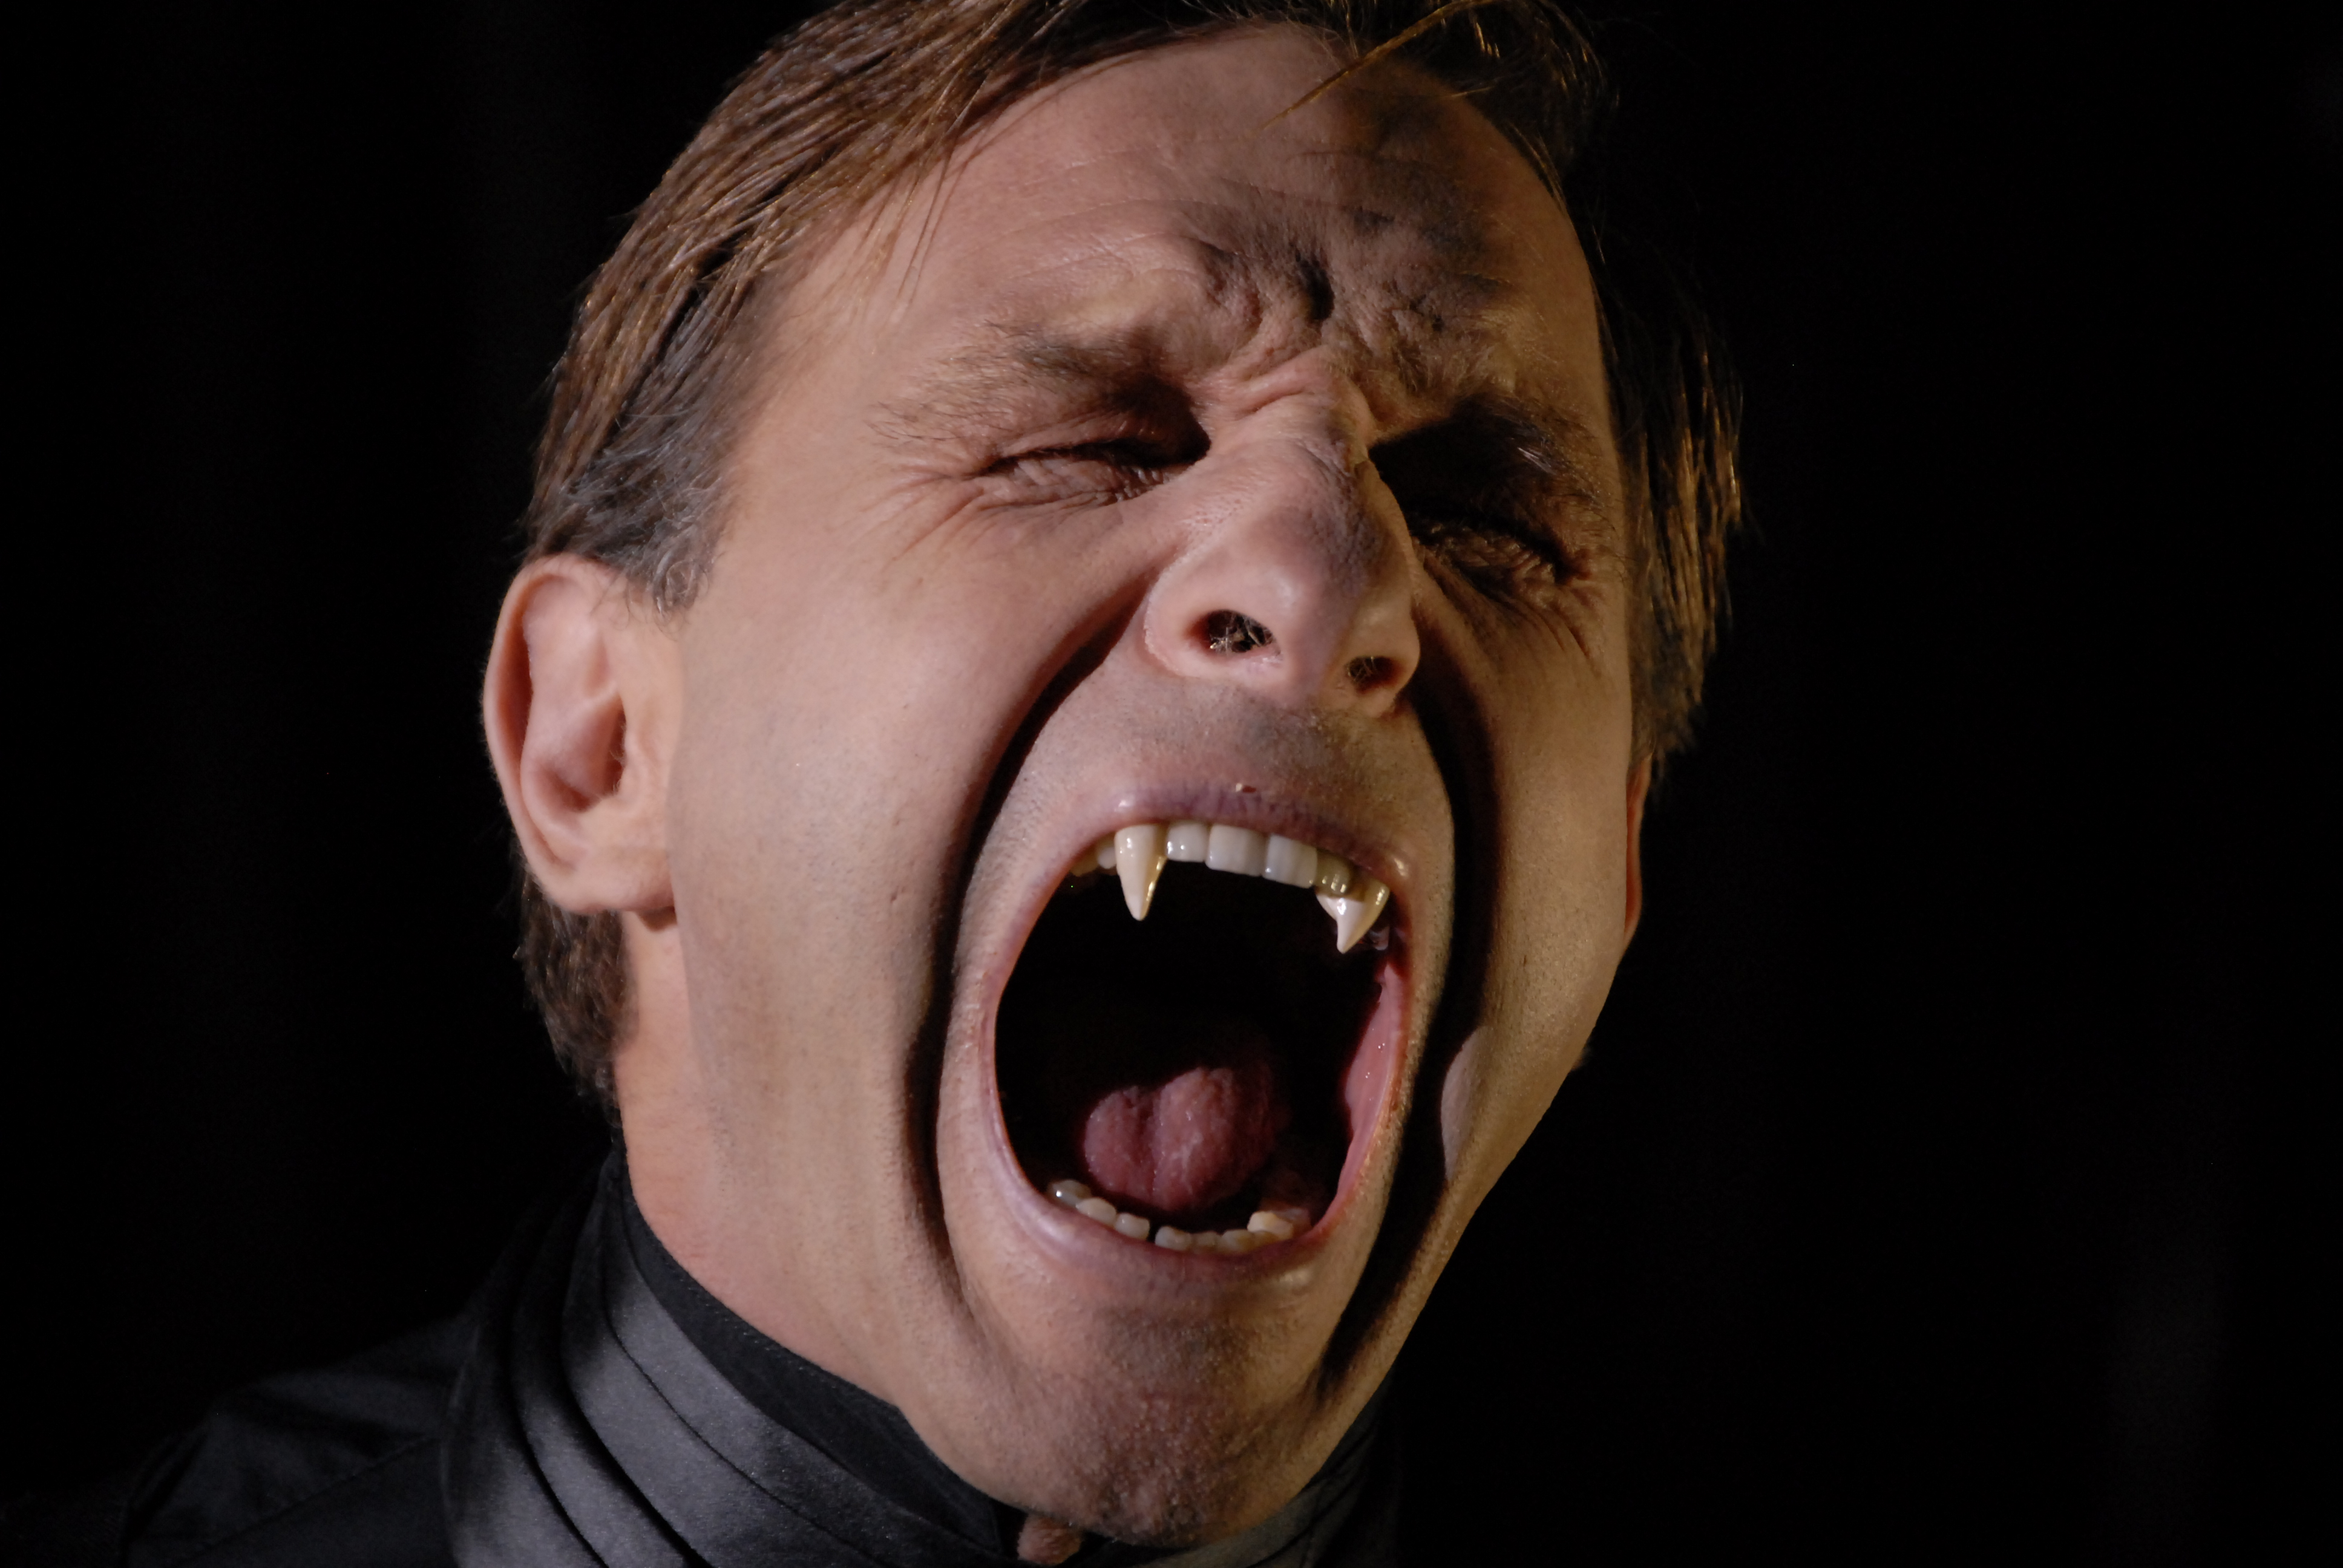 11. THOMAS KRETSCHMANN SHOWS OFF HIS FANGS AS THE LEGENDARY VAMPIRE COUNT IN ARGENTO'S DRACULA 3DIN